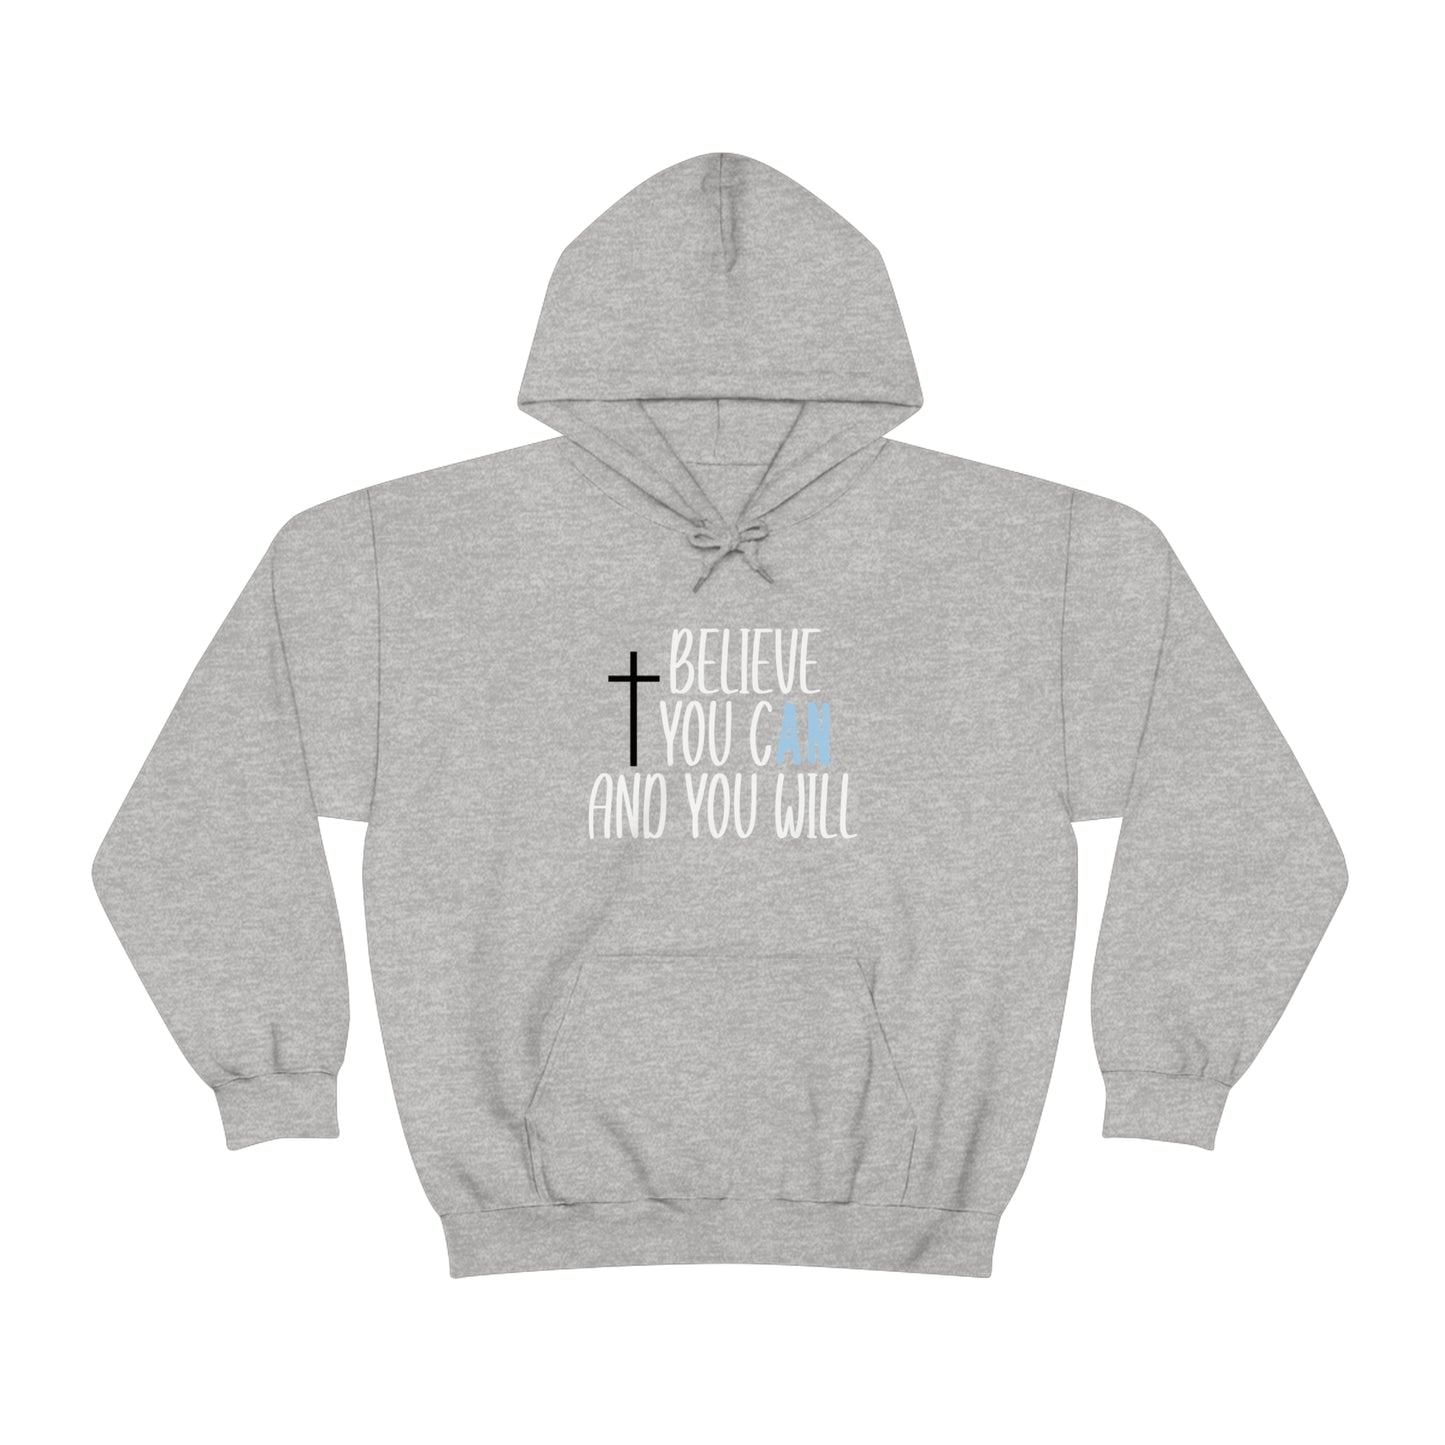 Adrianna Noriega: Believe You Can And You Will Hoodie